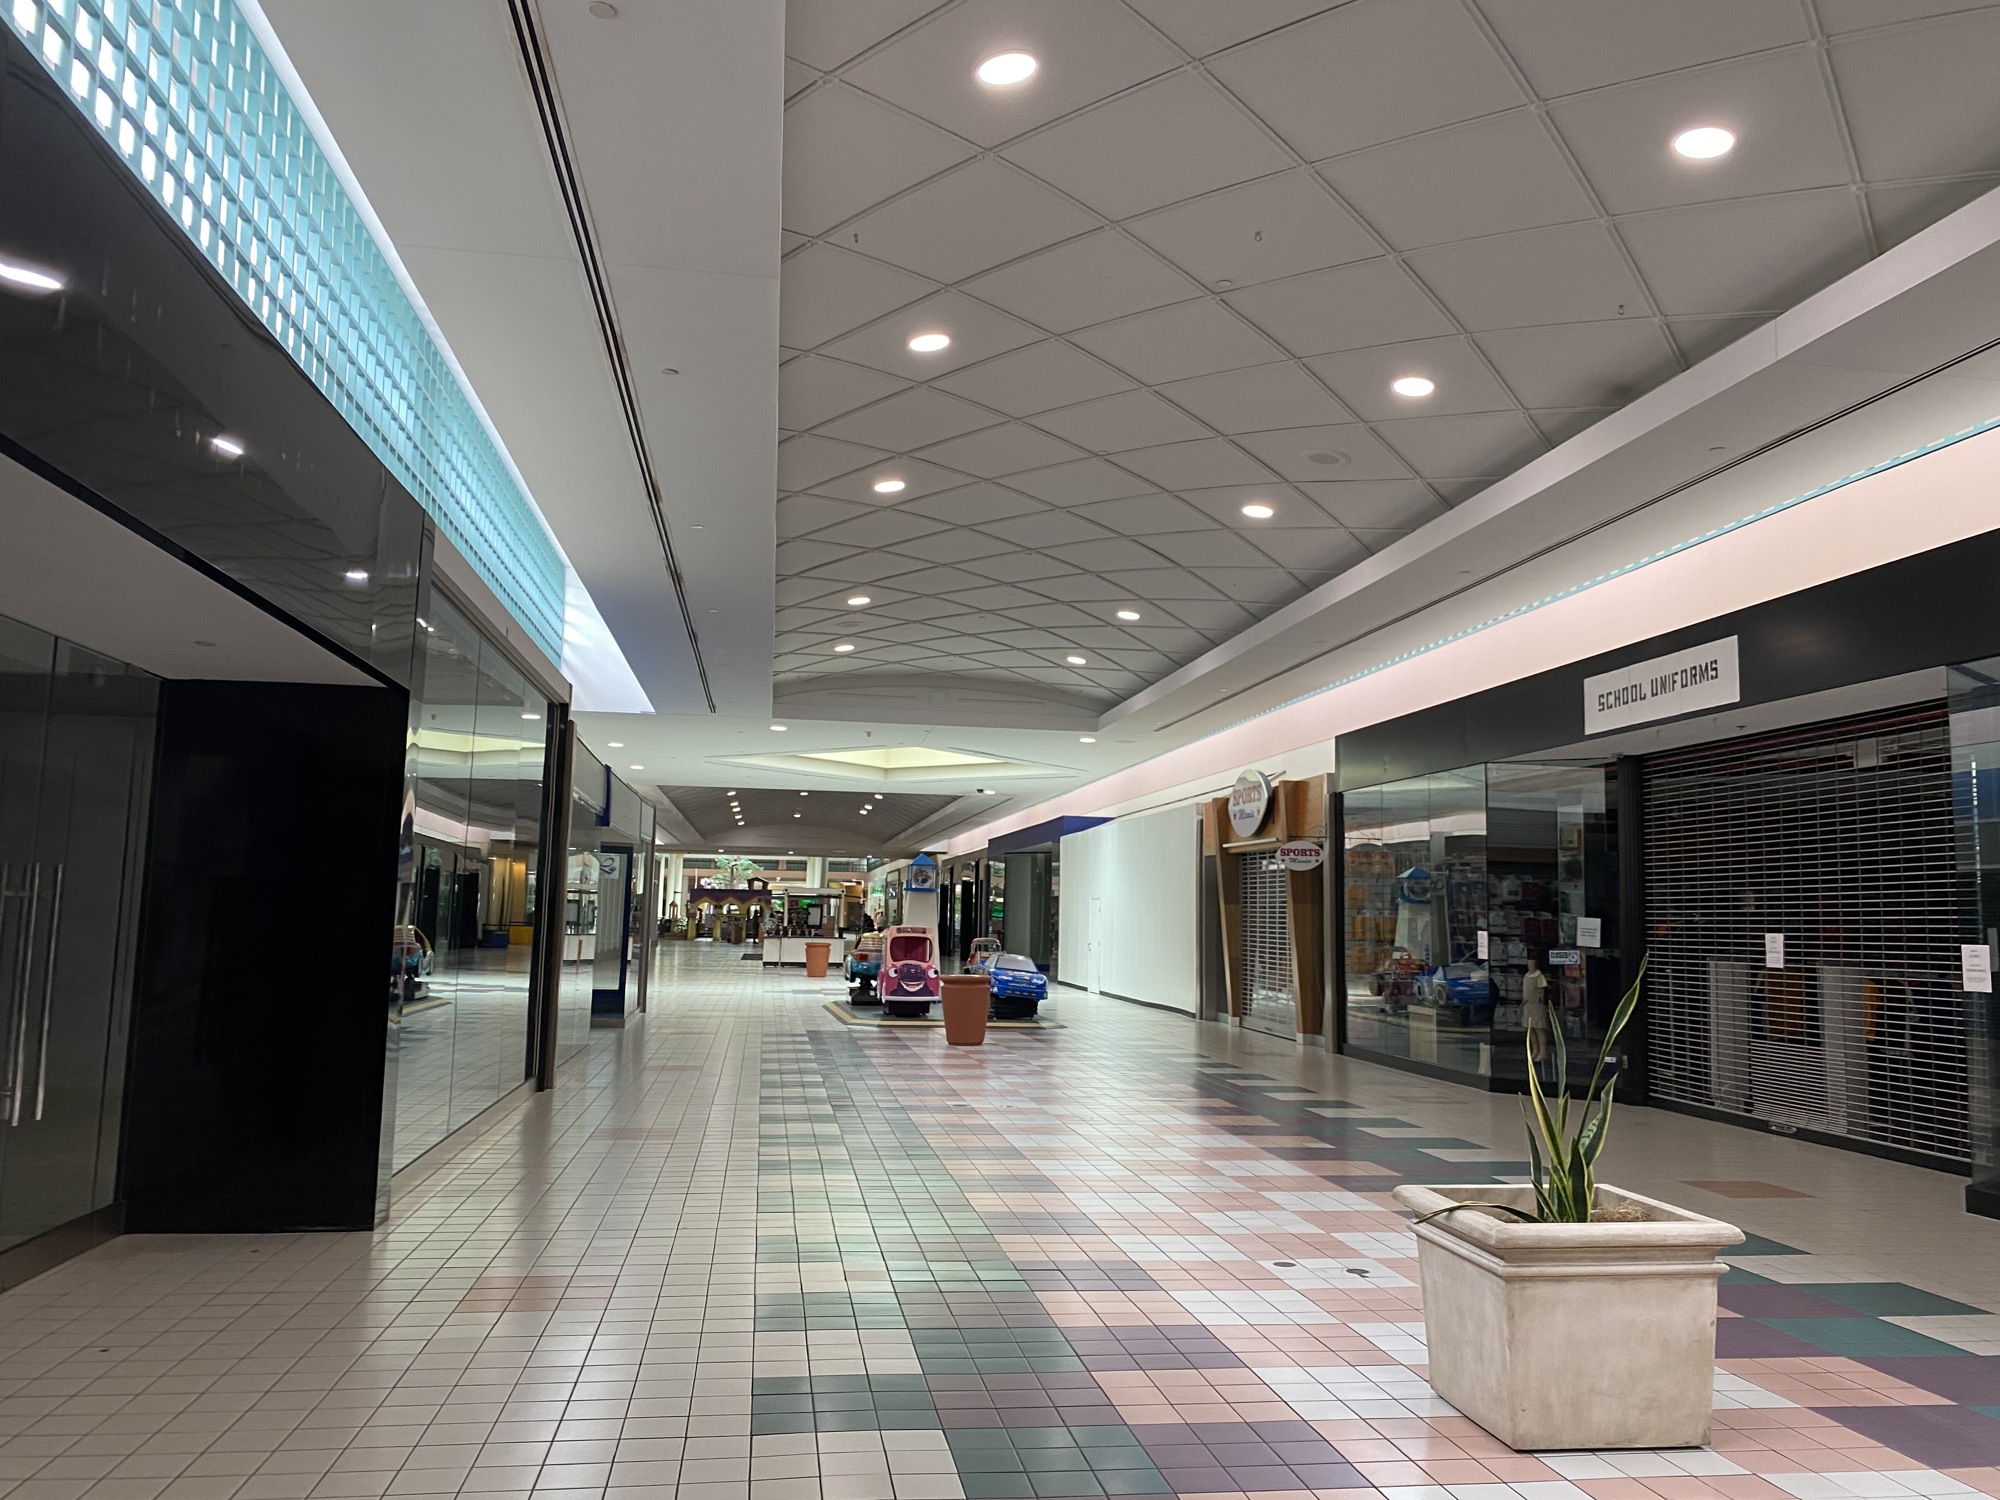 Many stores inside Regency Square Mall are closed.